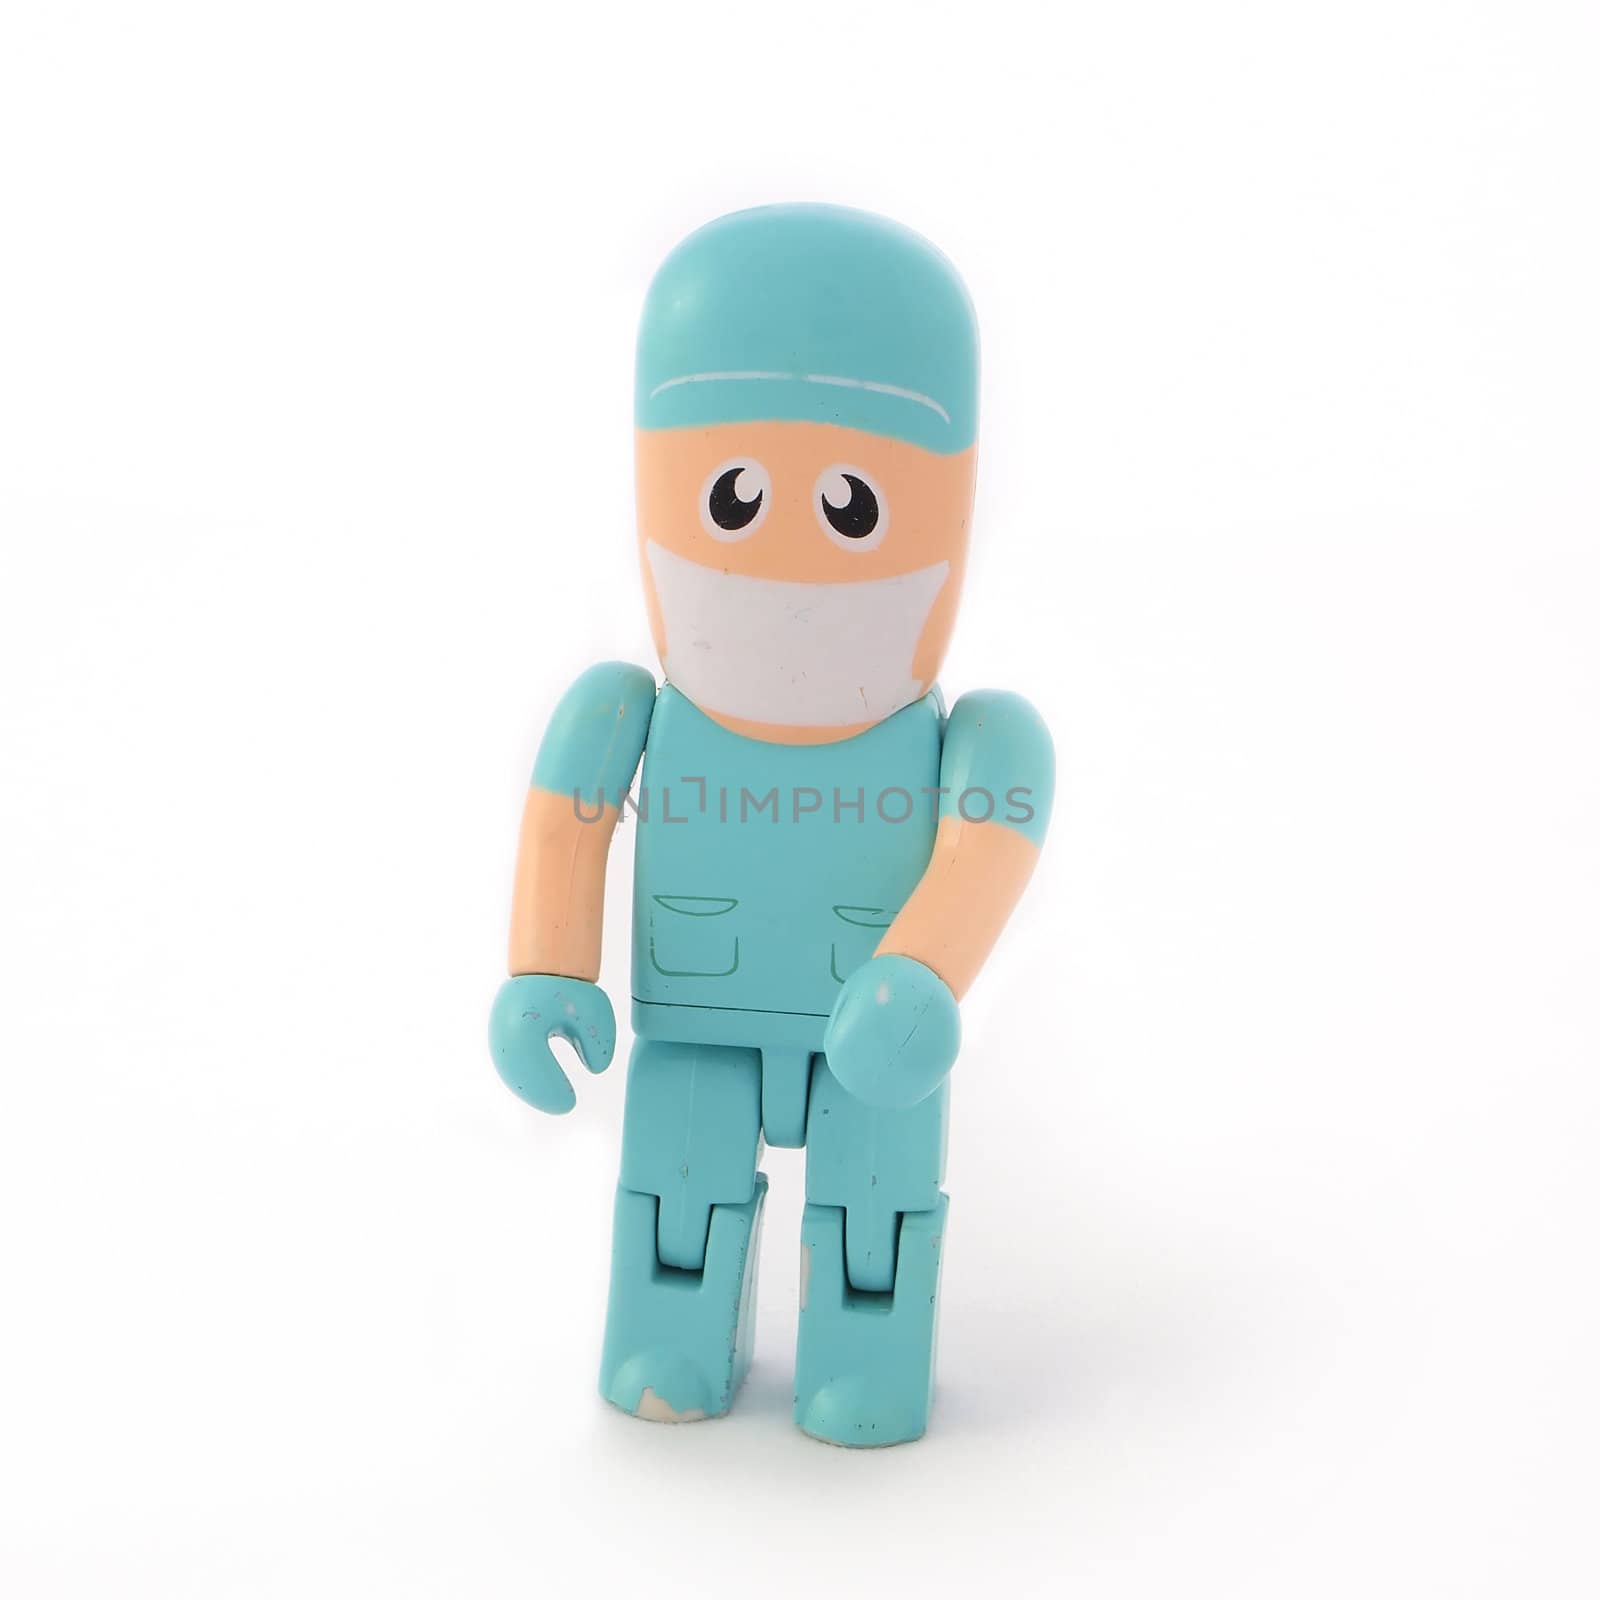 Plastic surgeon puppet toy by pljvv